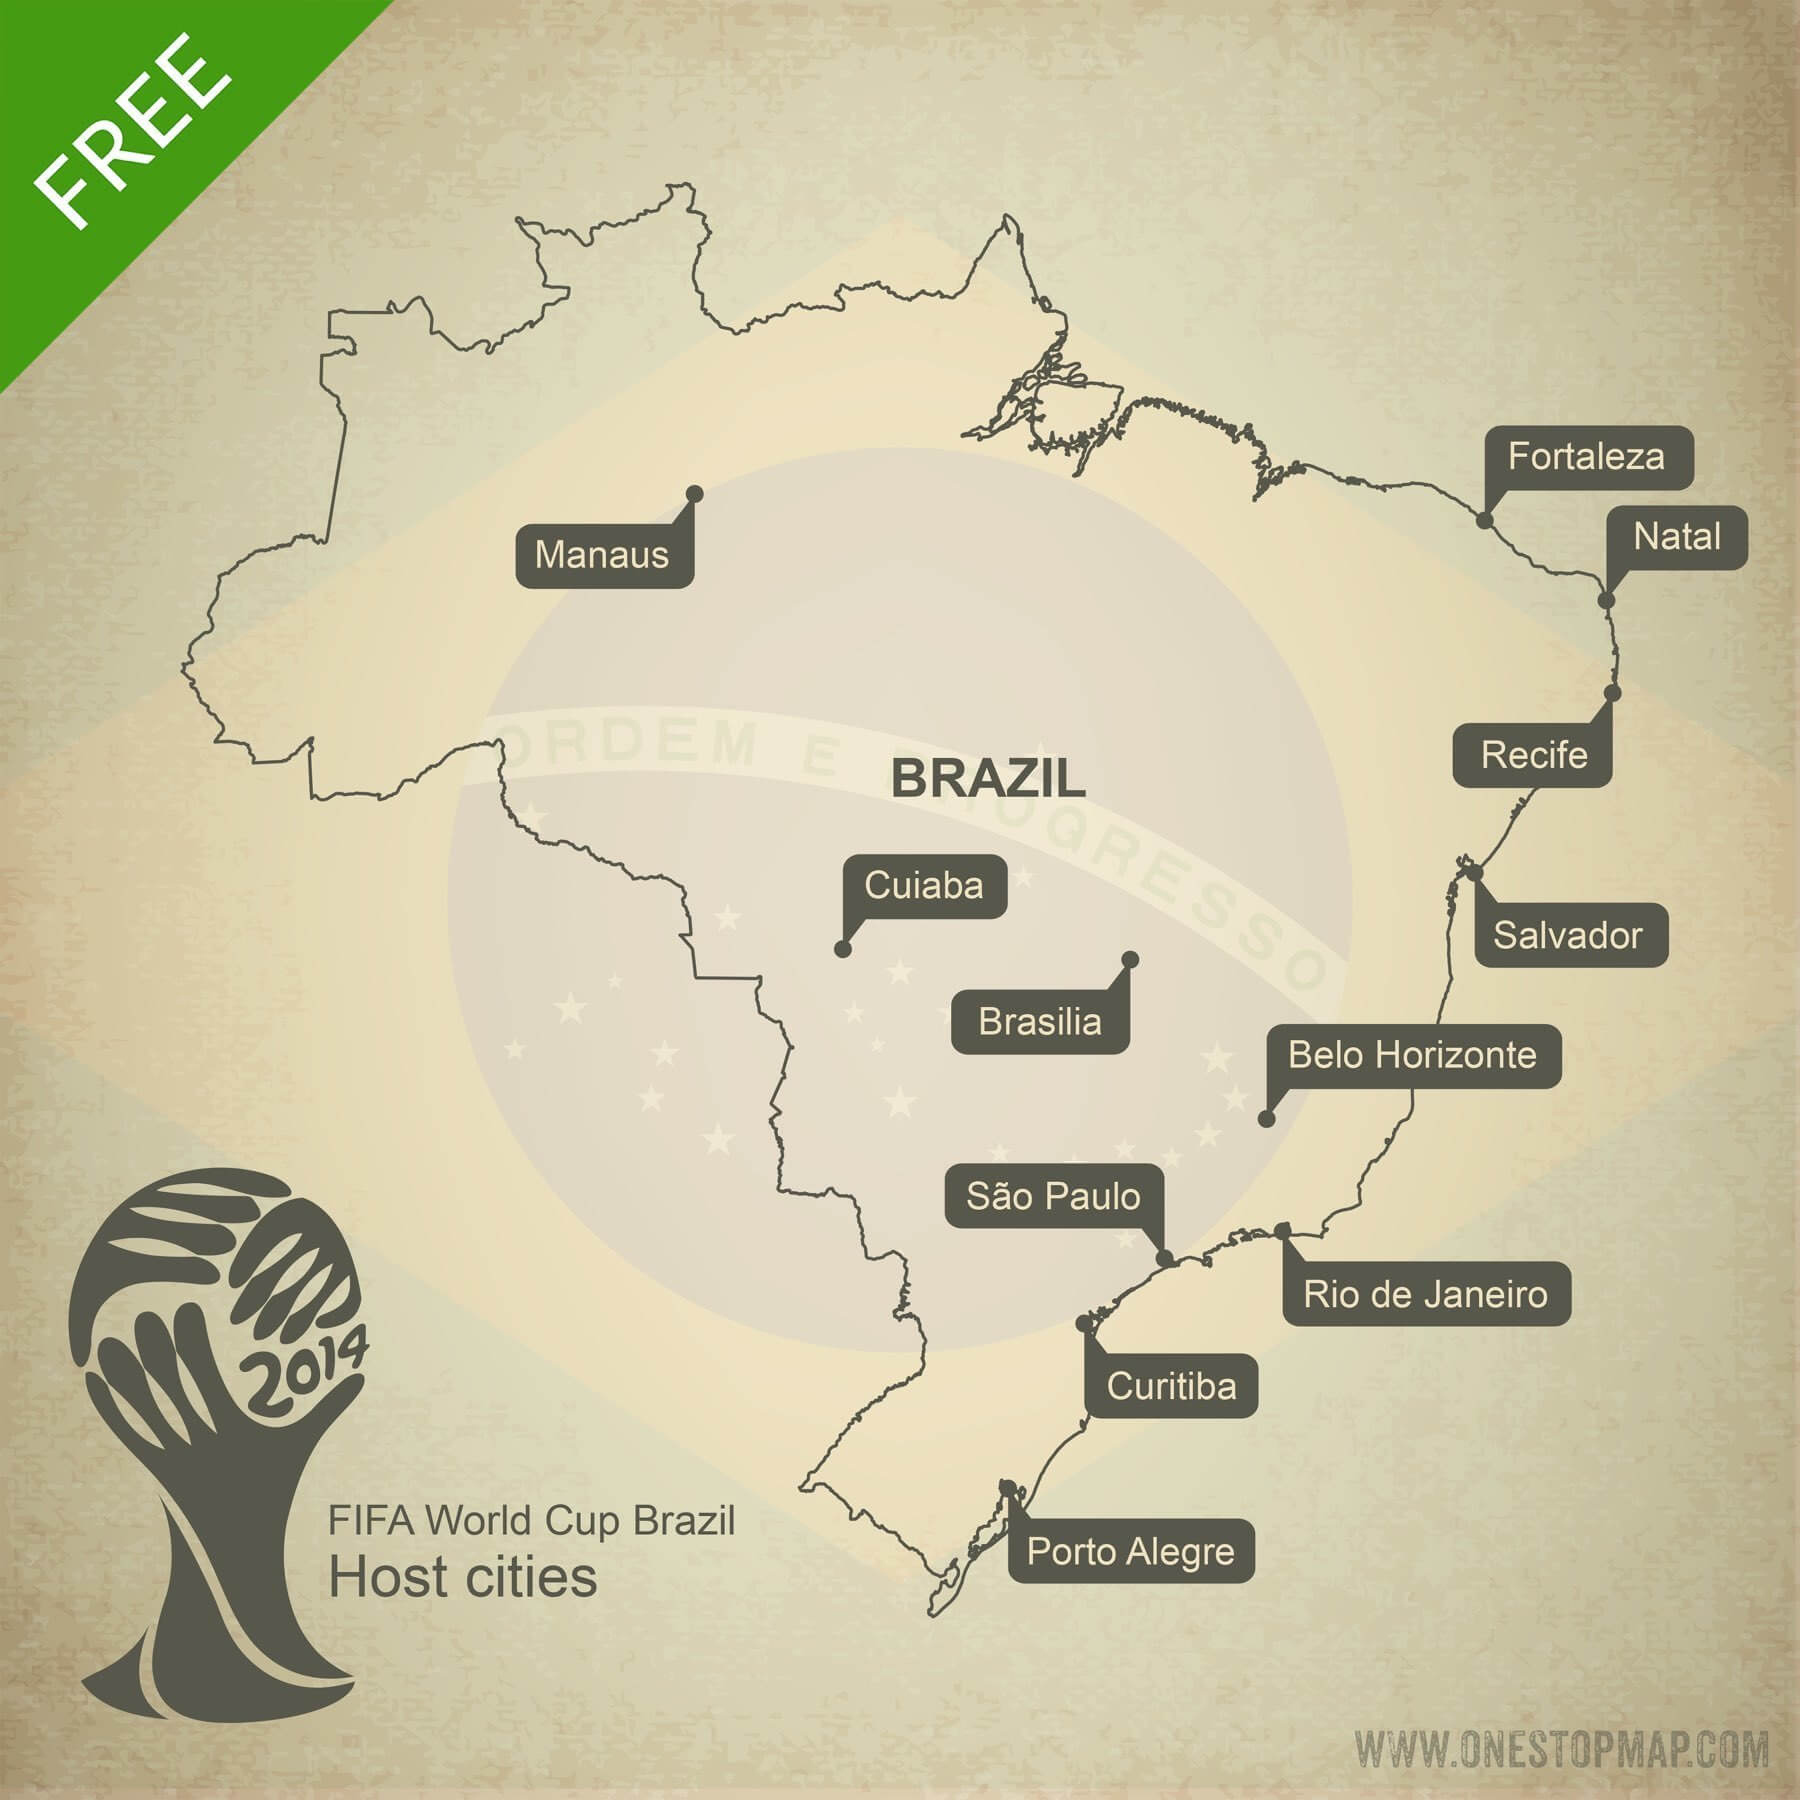 Free Vector Map Of Brazil World Cup 2014 | One Stop Map - Free Printable Map Of Brazil